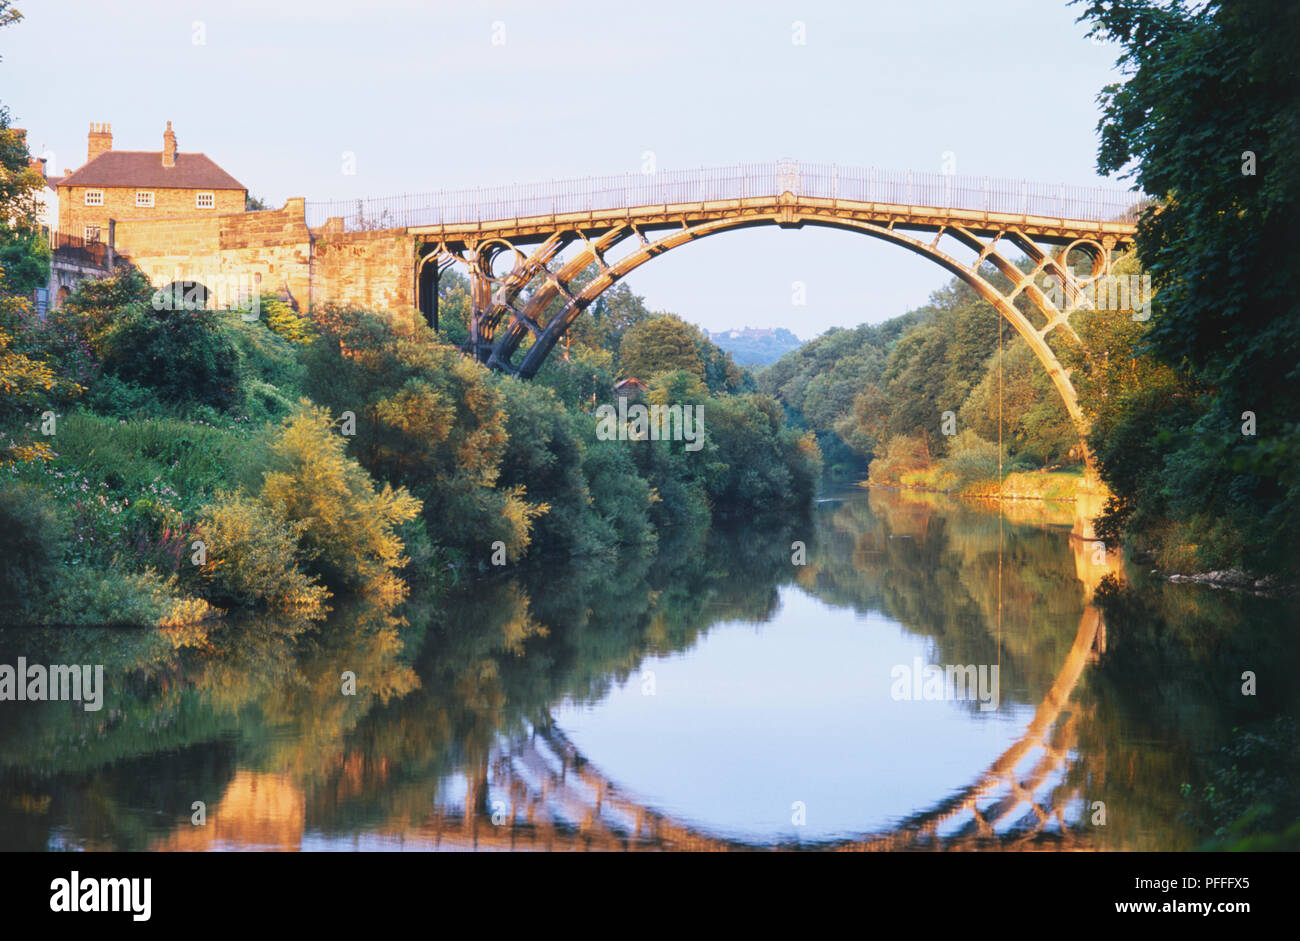 Great Britain, England, Shropshire, Ironbridge Gorge, situated in the birthplace of the industrial revolution, surrounded by beautiful countryside on the banks of the River Severn. Stock Photo